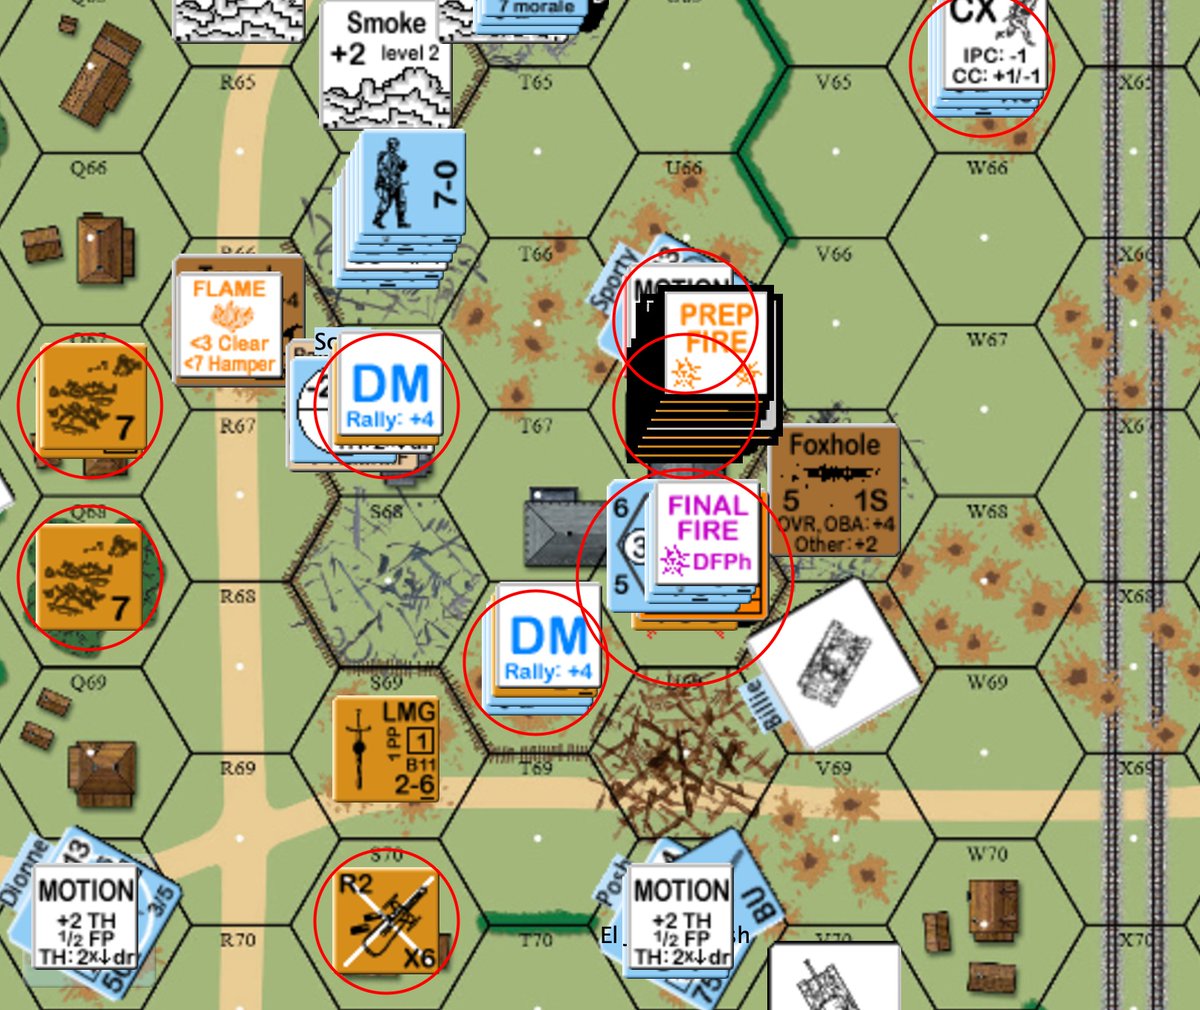 Ponyri, northern flank of the Kursk salient - the final assault on the schoolhouse begins. Things get off to a rough start as two panzers crash into the building only to land in the cellar, minutes apart. The defenders can't take much comfort though as another wave appraoches